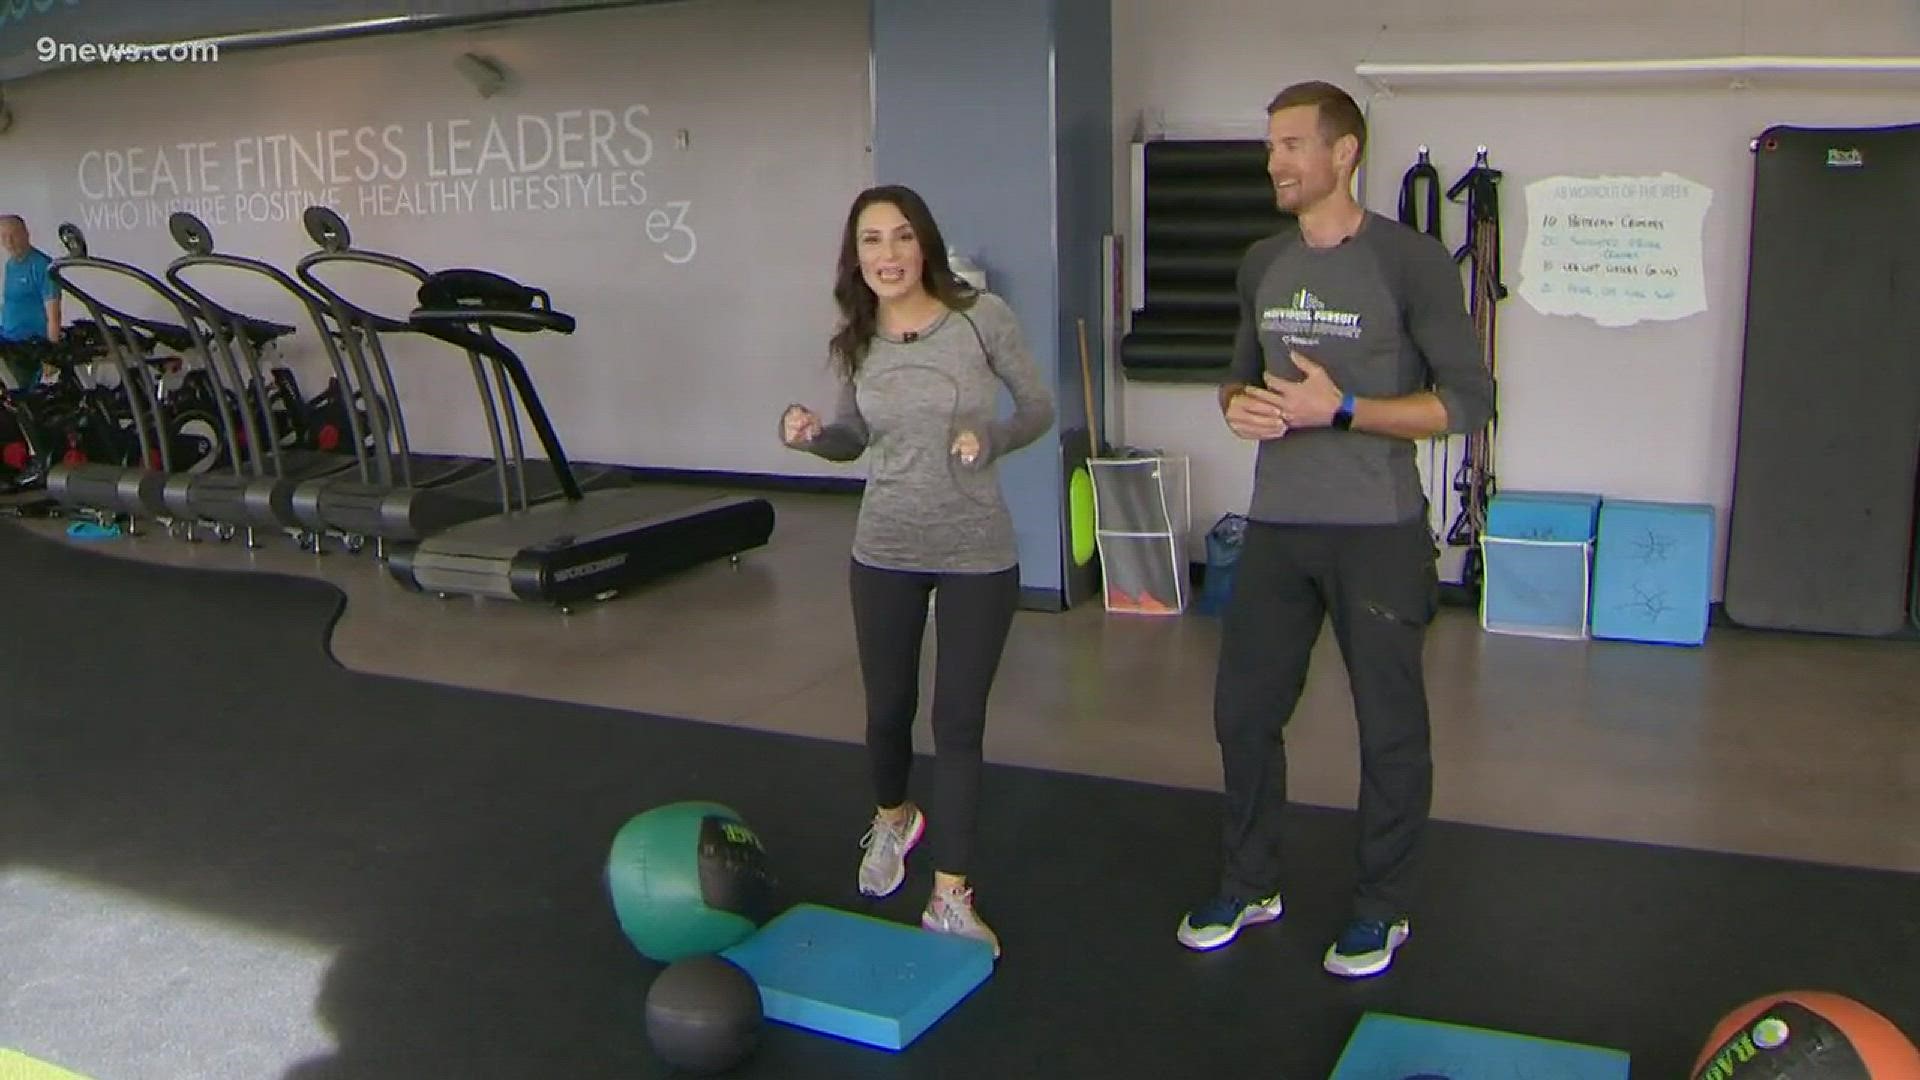 These workouts will help stabilize the body and get you ready for the winter season.